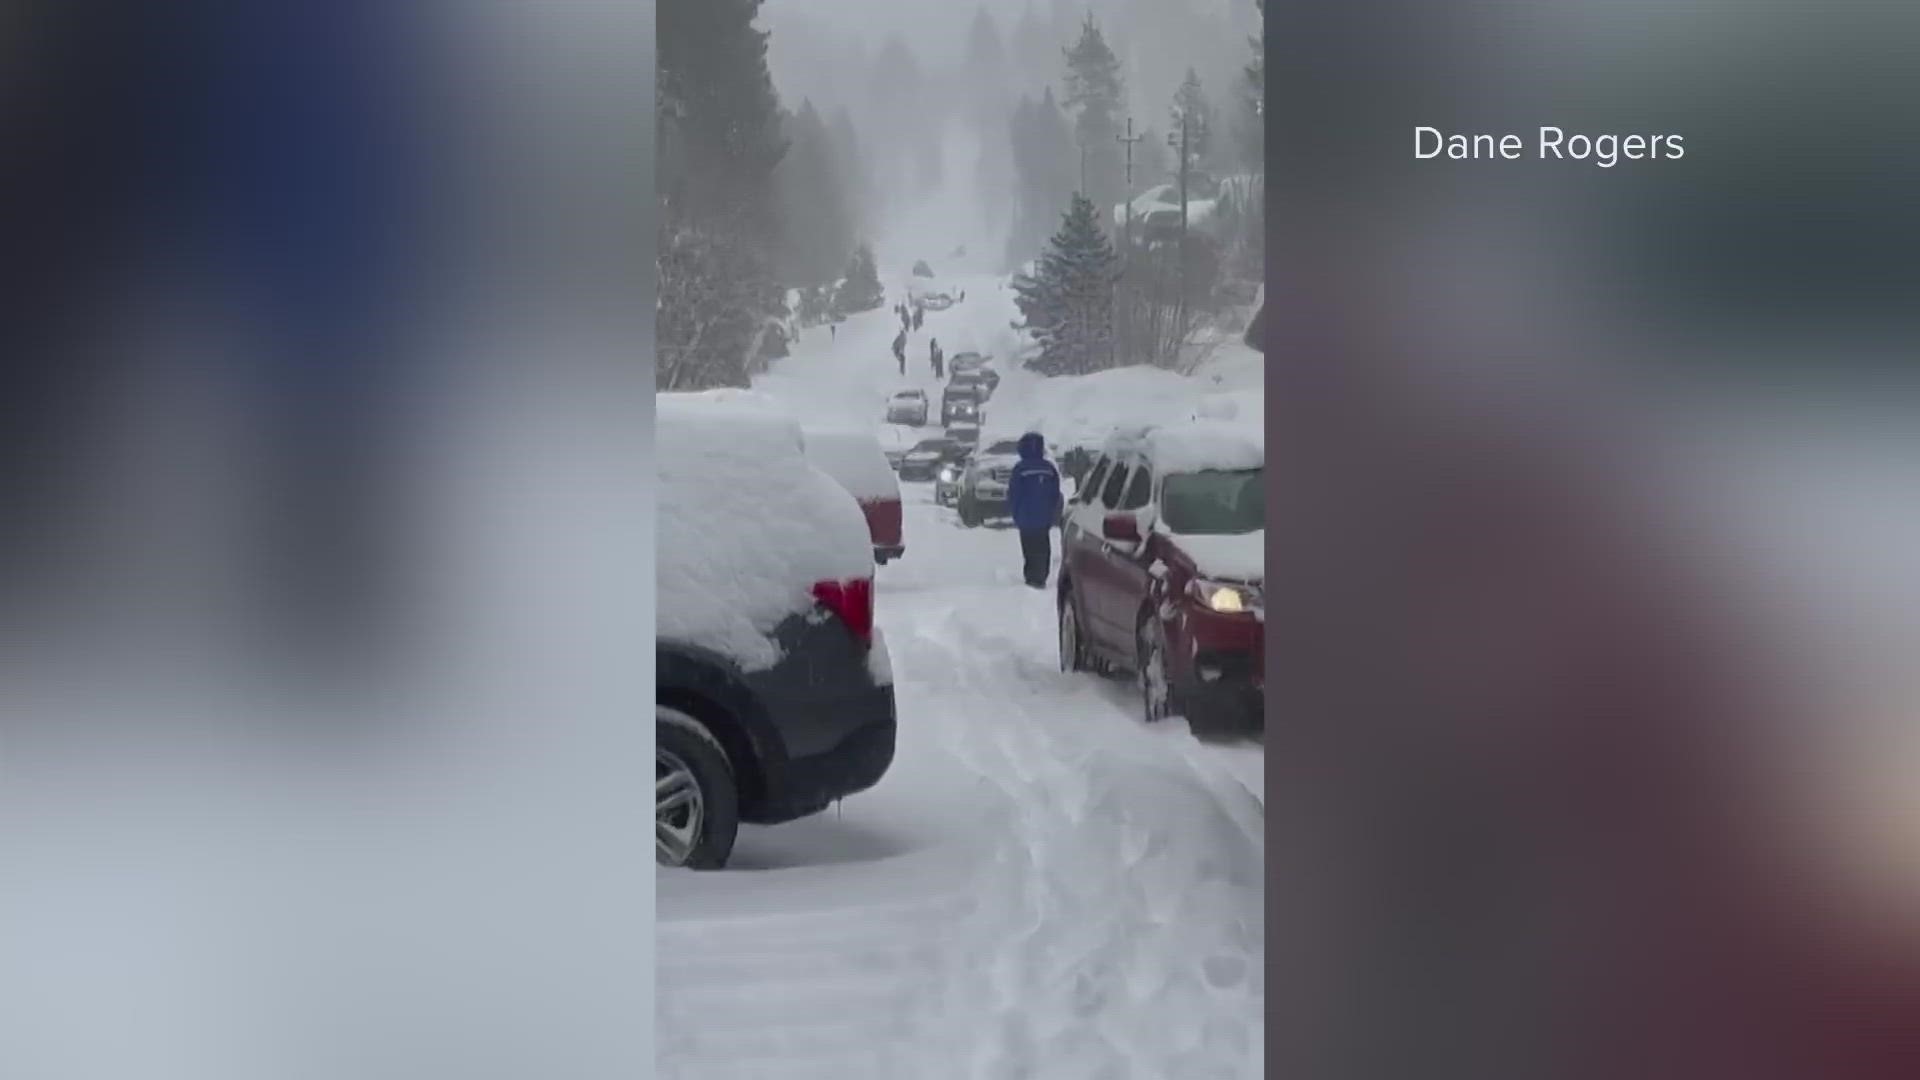 Northern California Storm: I-80 closed, power outages and more - March 3, 2023